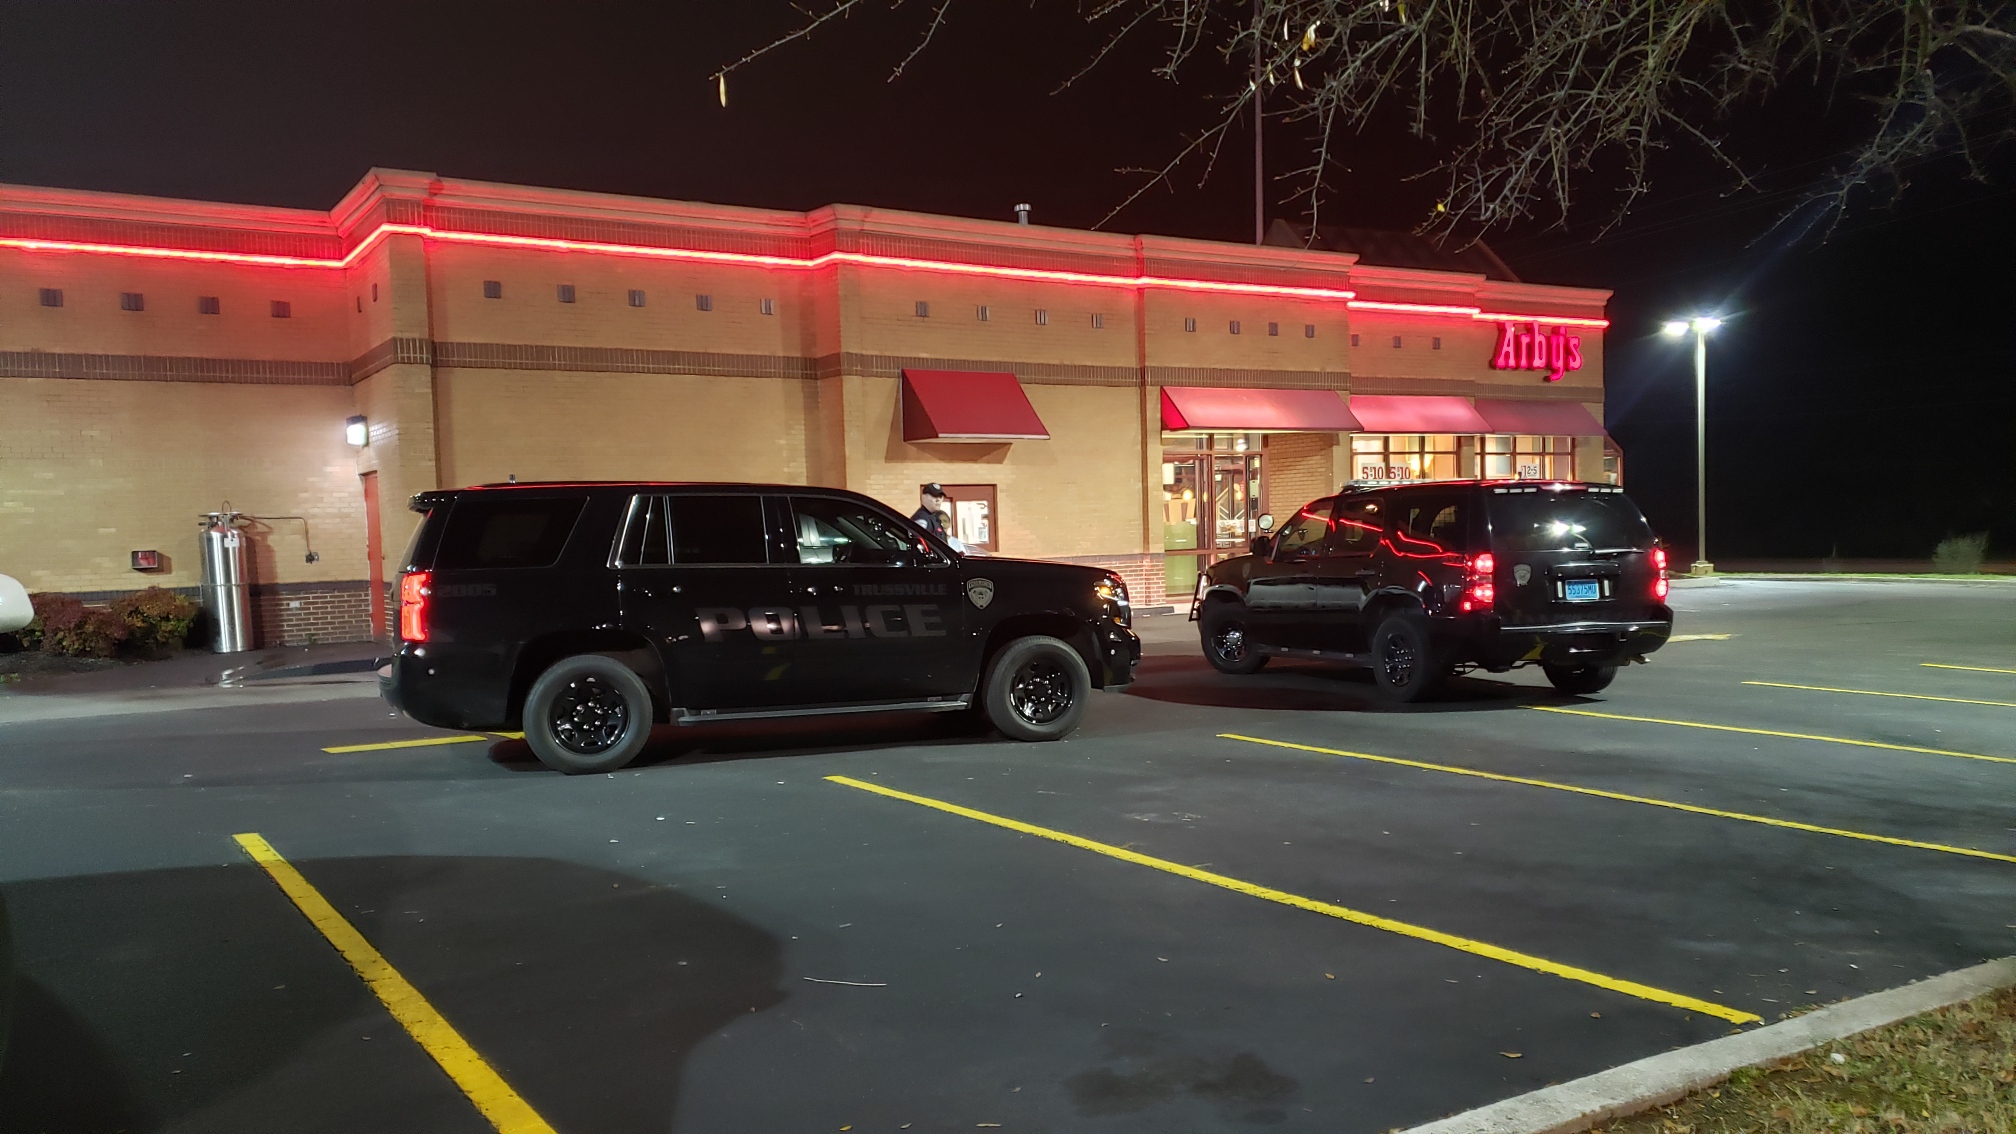 BREAKING: Armed robbery at Arby's in Trussville